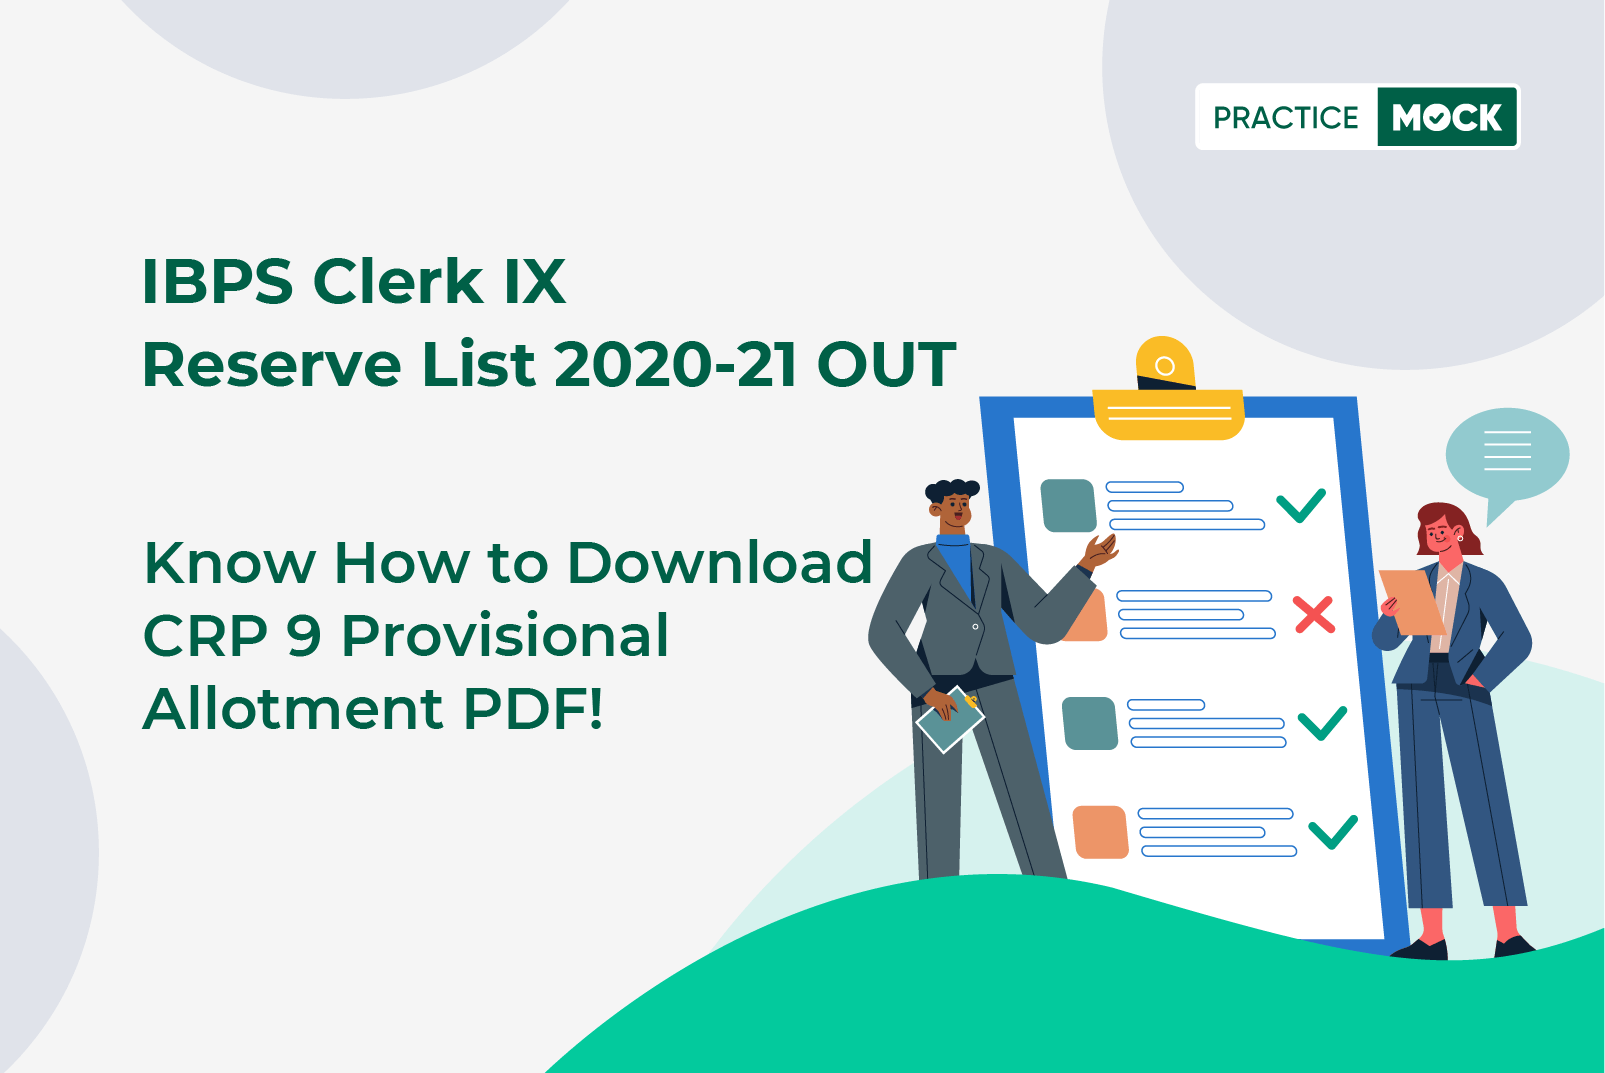 IBPS Clerk IX Reserve List 2020-21 OUT-Know How to Download CRP 9 Provisional Allotment PDF!